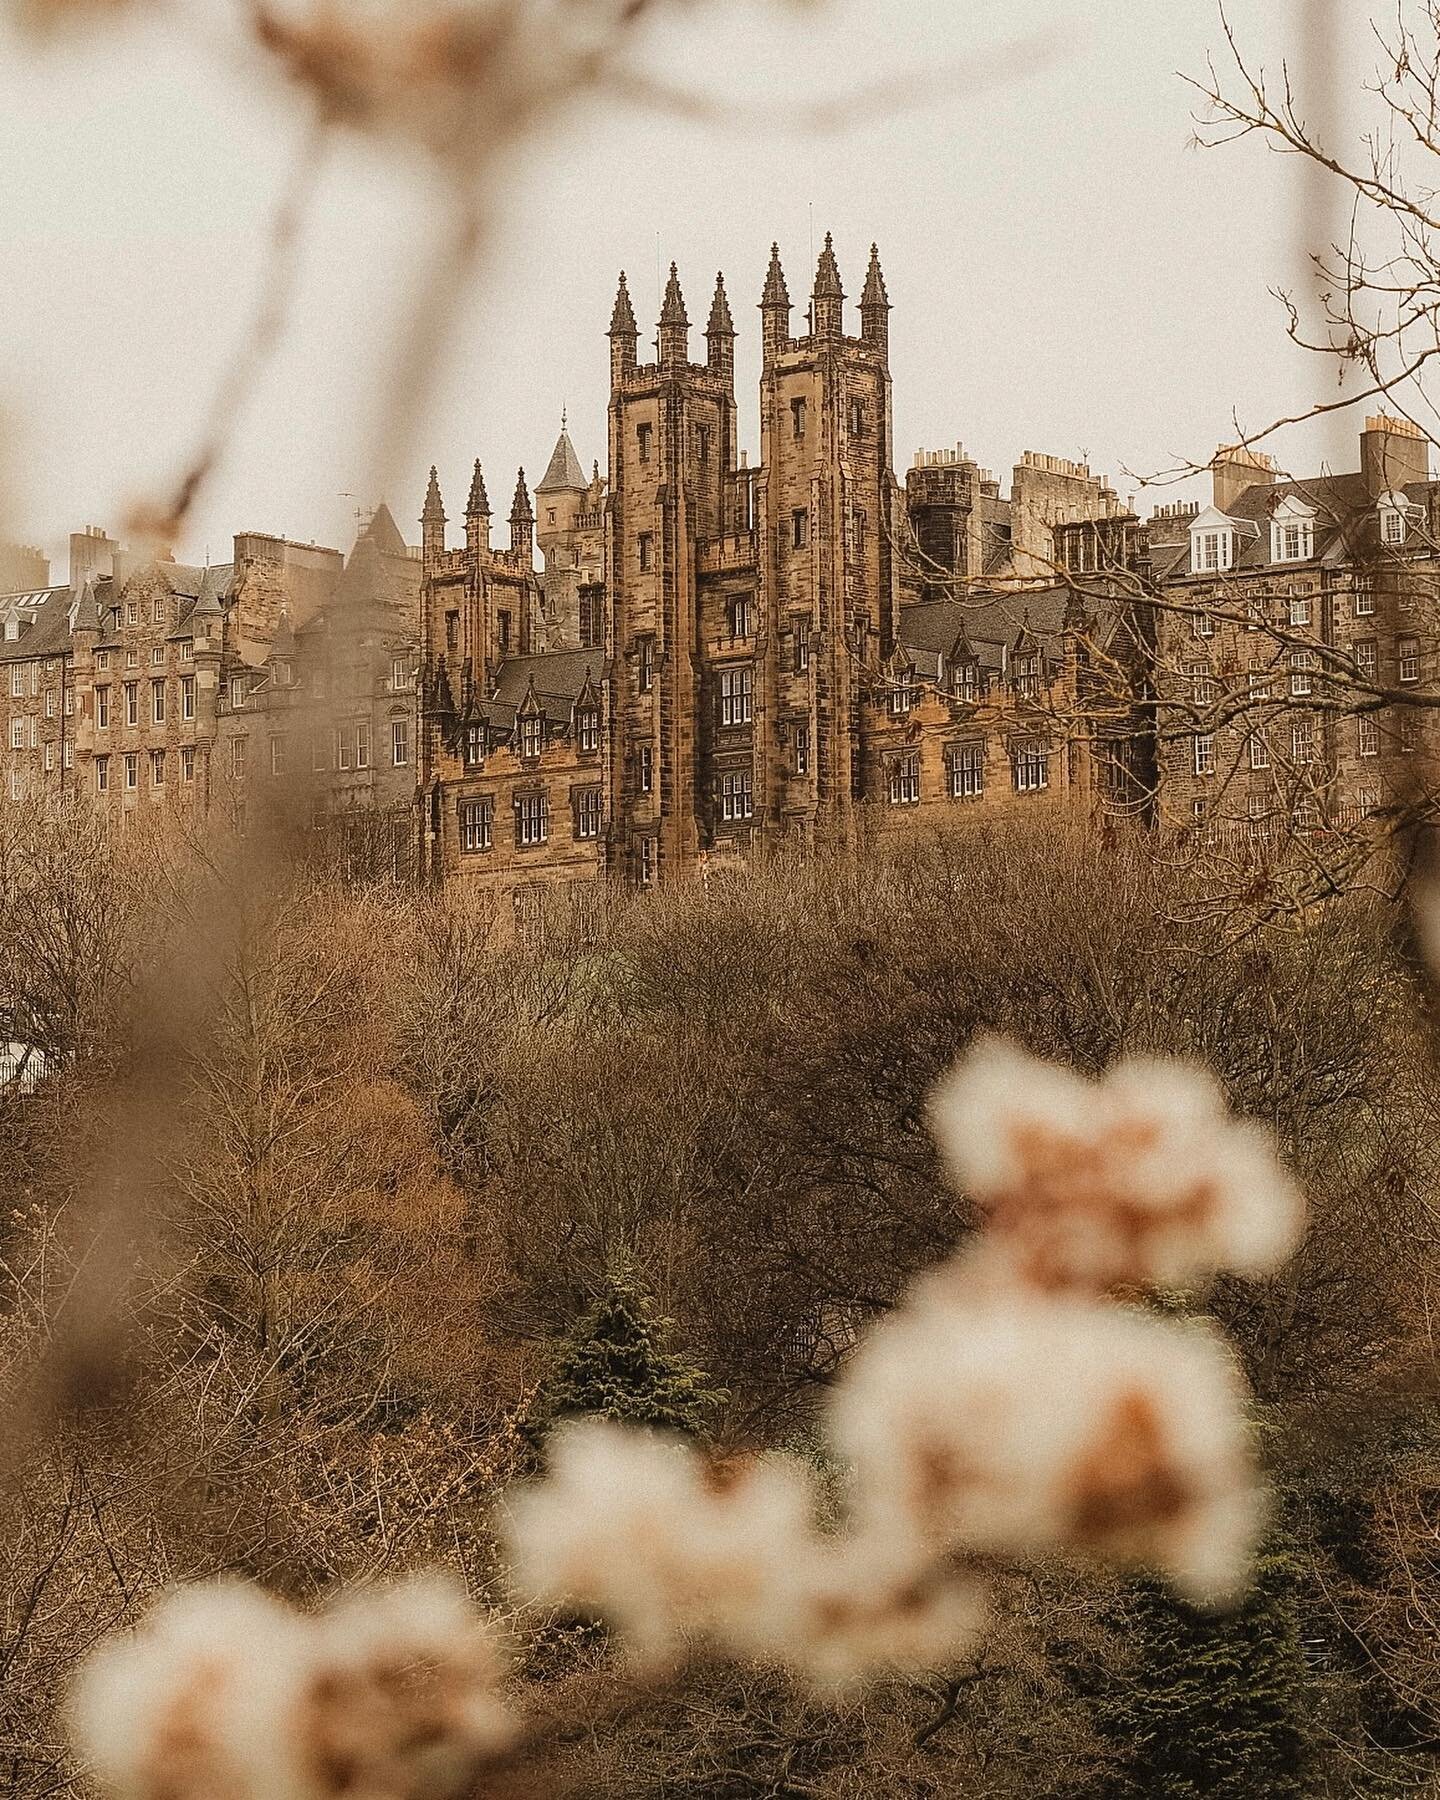 &ldquo;Well, let it pass, he thought; April is over, April is over. There are all kinds of love in the world, but never the same love twice.&rdquo; {F. Scott Fitzgerald}
~
A love letter to Princes Street Gardens in the spring 🌸🌿 ah, who am I kiddin